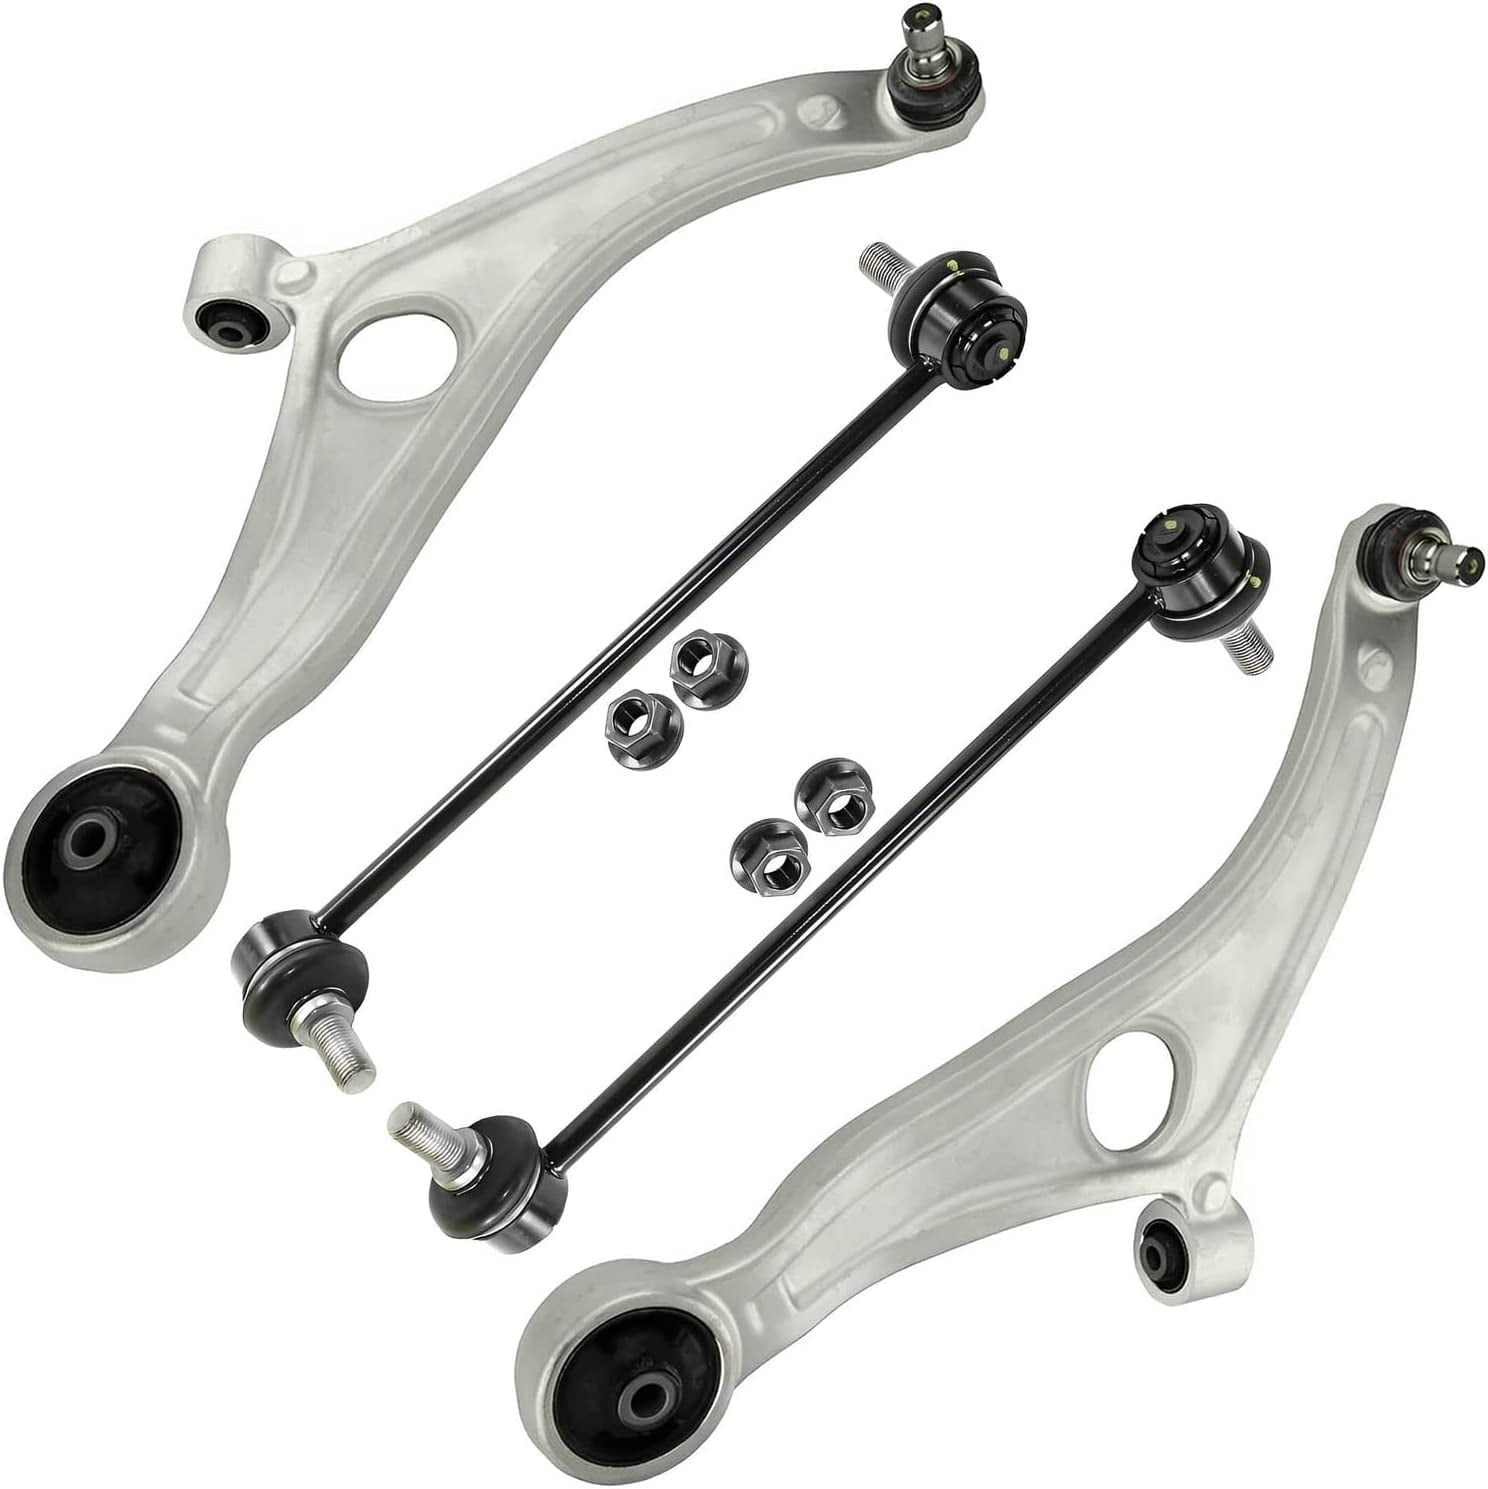 Detroit Axle - Front Lower Control Arms with Ball Joints + Sway Bars  Replacement for Hyundai Sonata Azera Kia Optima - 4pc Set